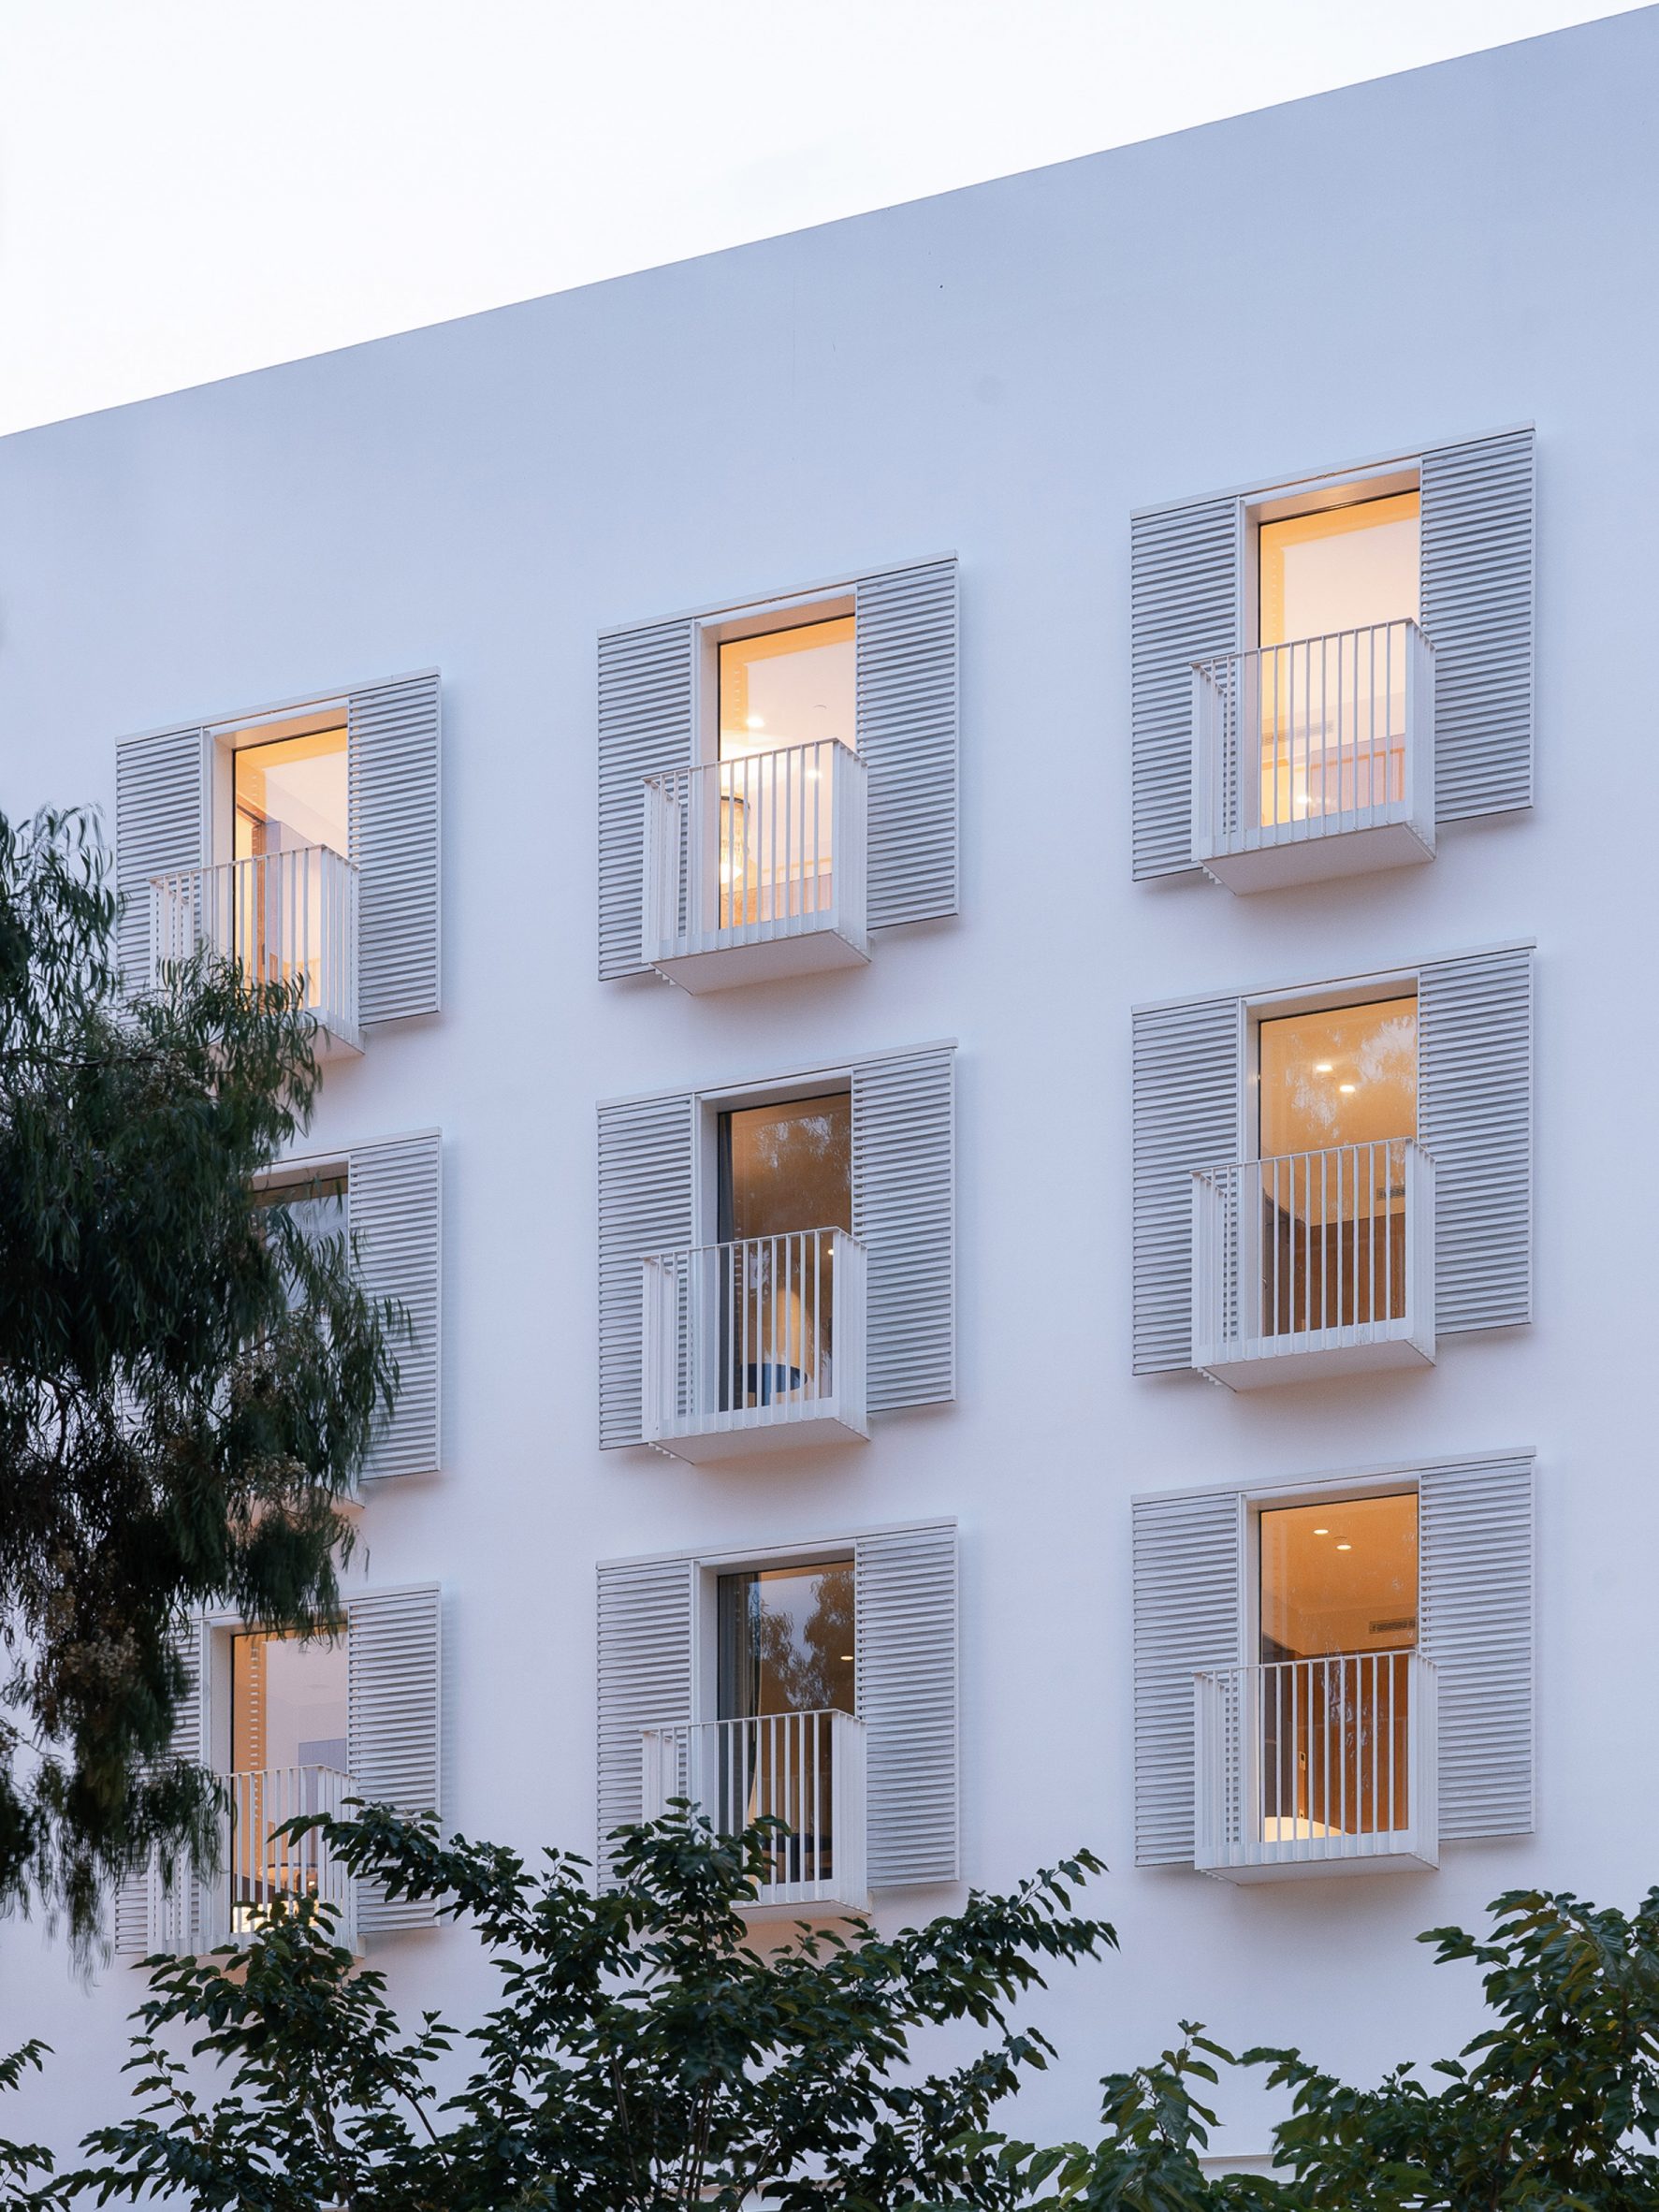 Image of The Standard Ibiza's windows balconies and shutters